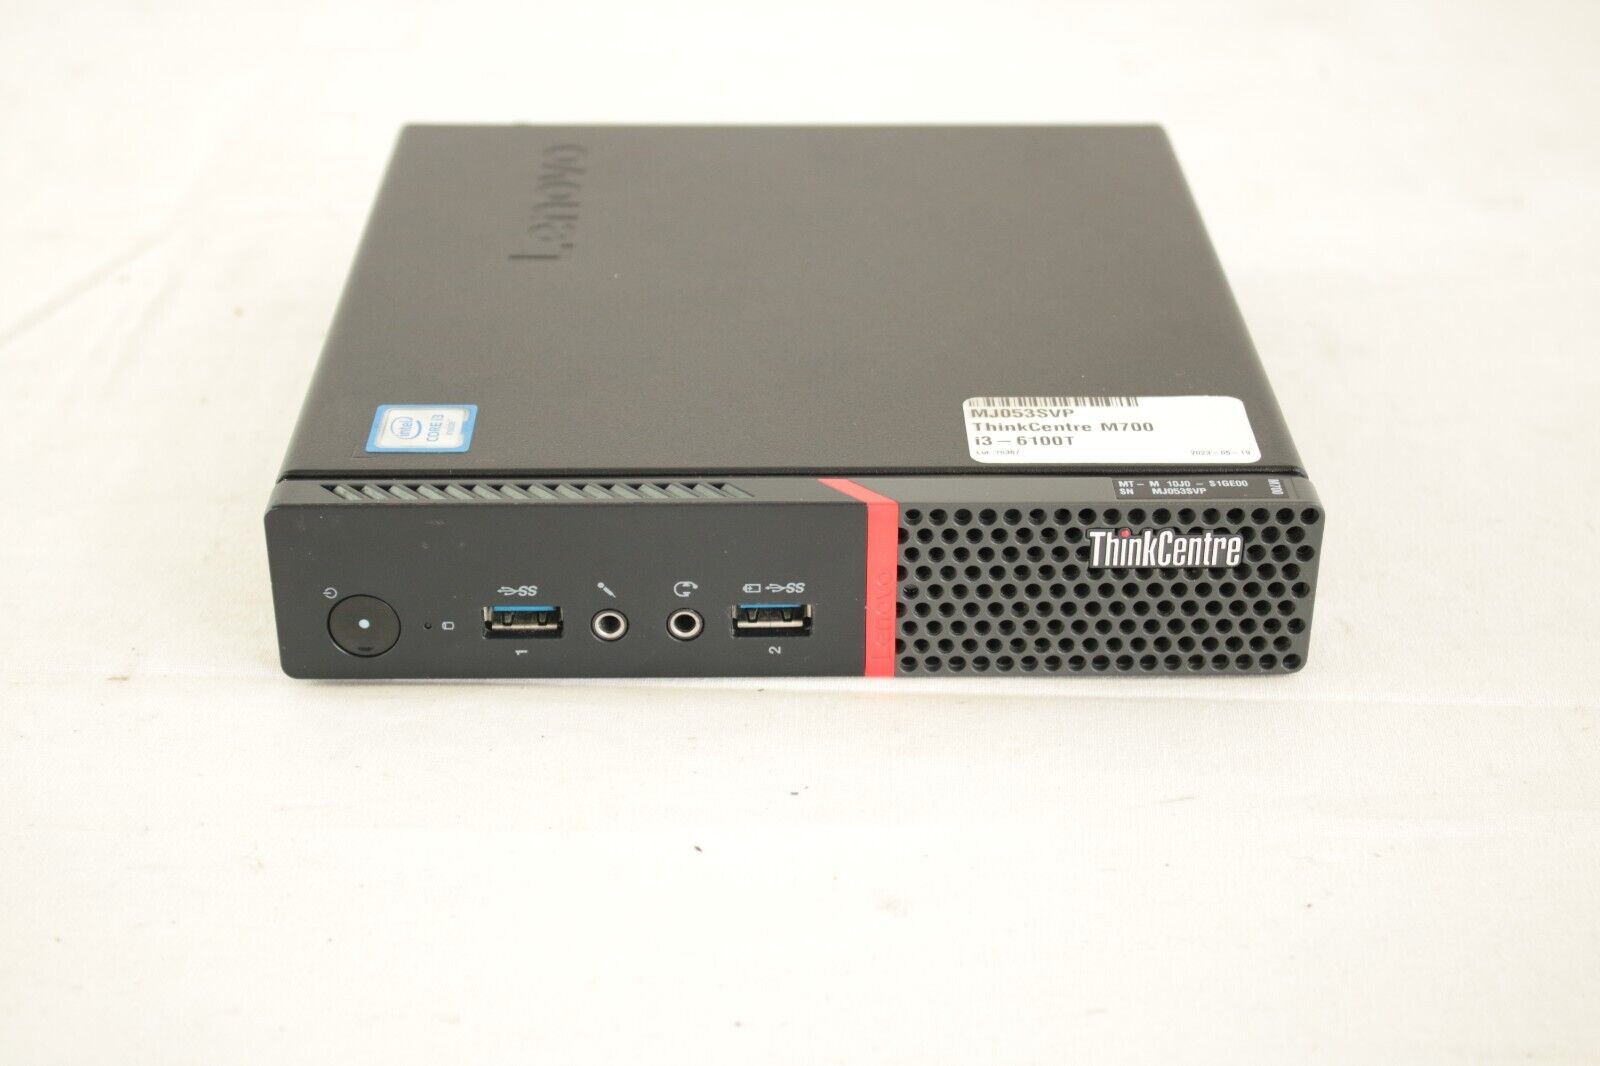 Lenovo ThinkCentre M700 w/ Core i3-6100T CPU @ 3.1GHz - 4GB RAM - No HDD or OS